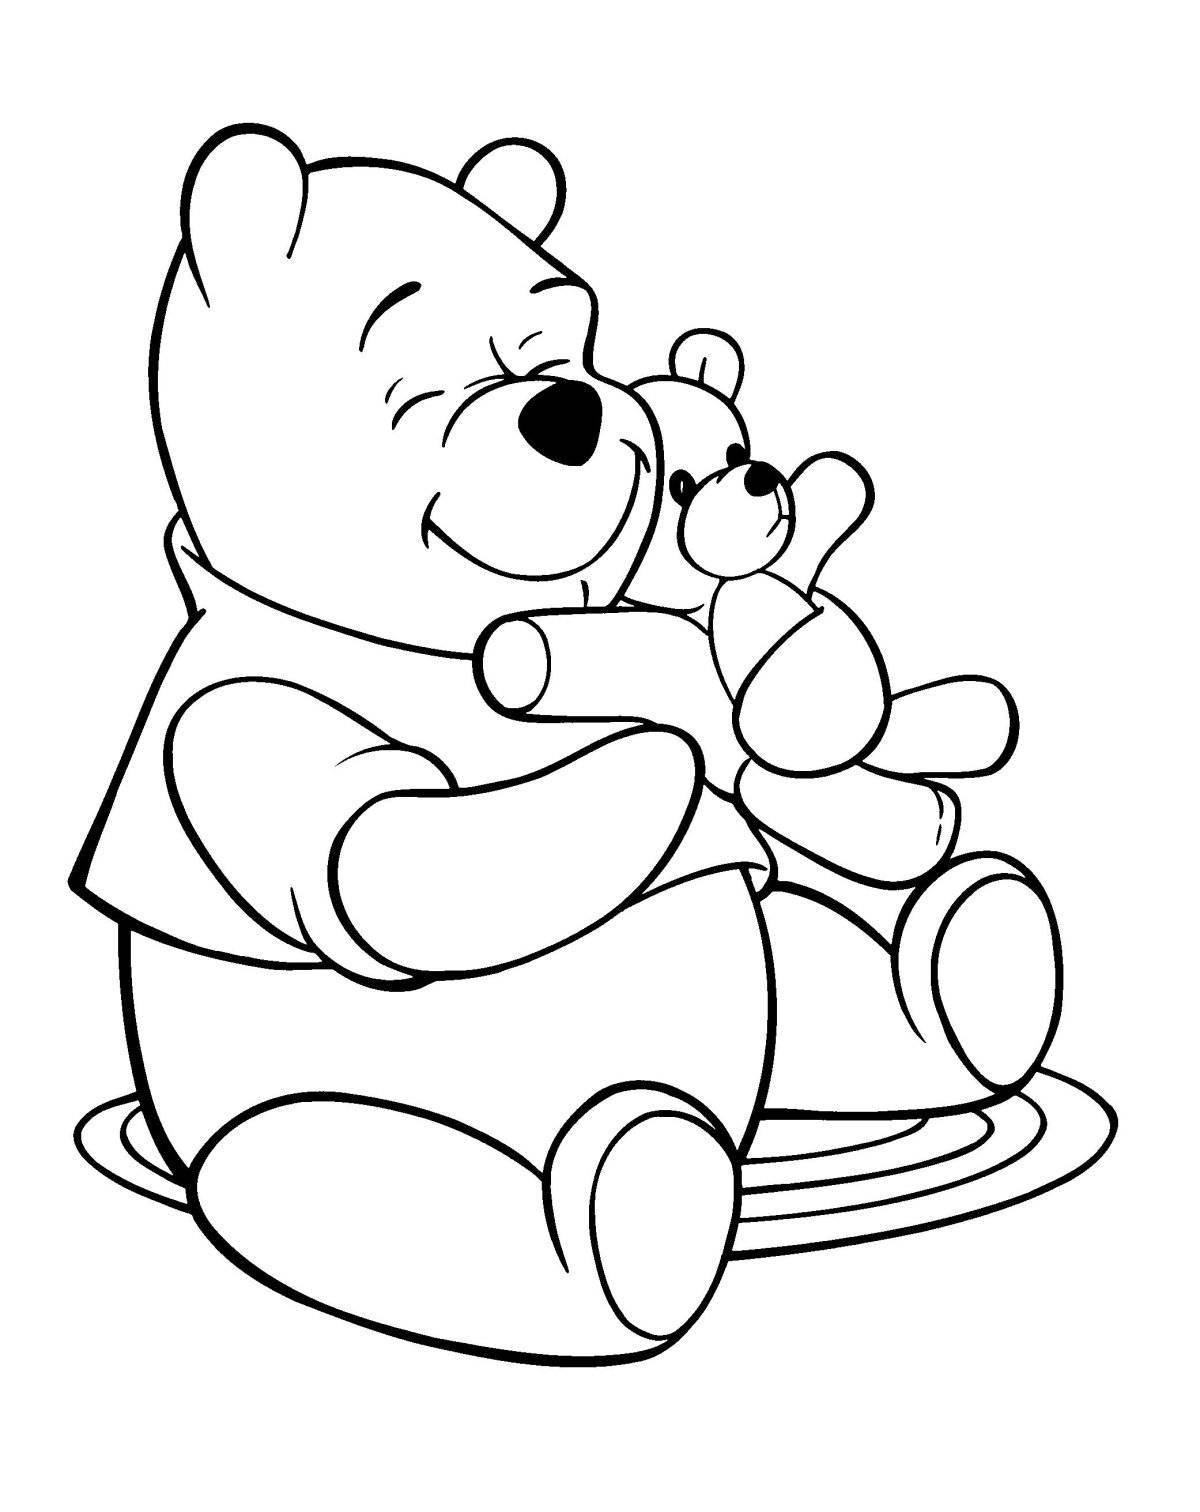 Coloring book playful bear with a bow